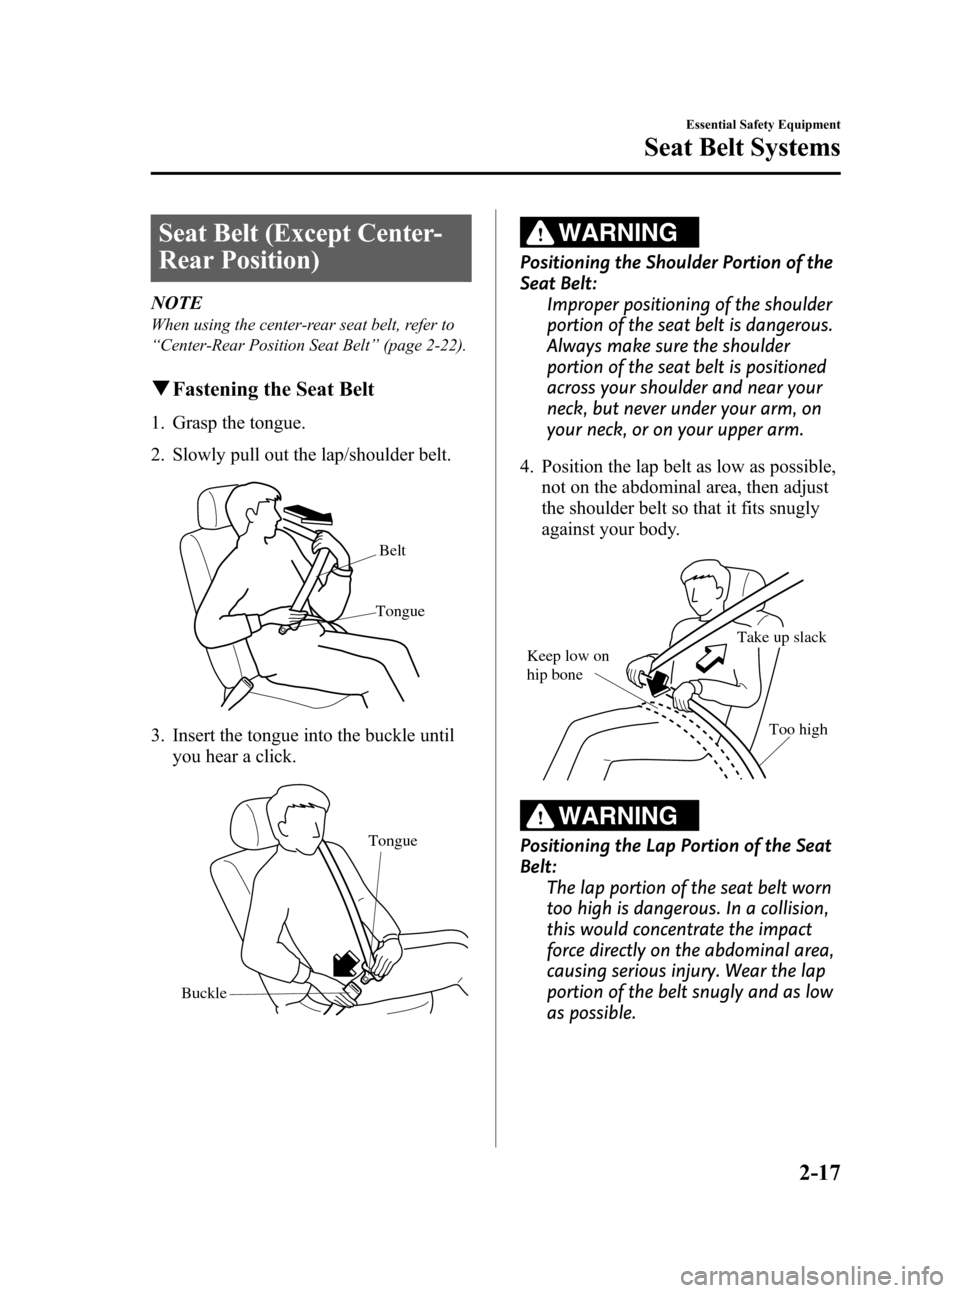 MAZDA MODEL CX-7 2009   (in English) Owners Manual Black plate (29,1)
Seat Belt (Except Center-
Rear Position)
NOTE
When using the center-rear seat belt, refer to
“Center-Rear Position Seat Belt”(page 2-22).
qFastening the Seat Belt
1. Grasp the t